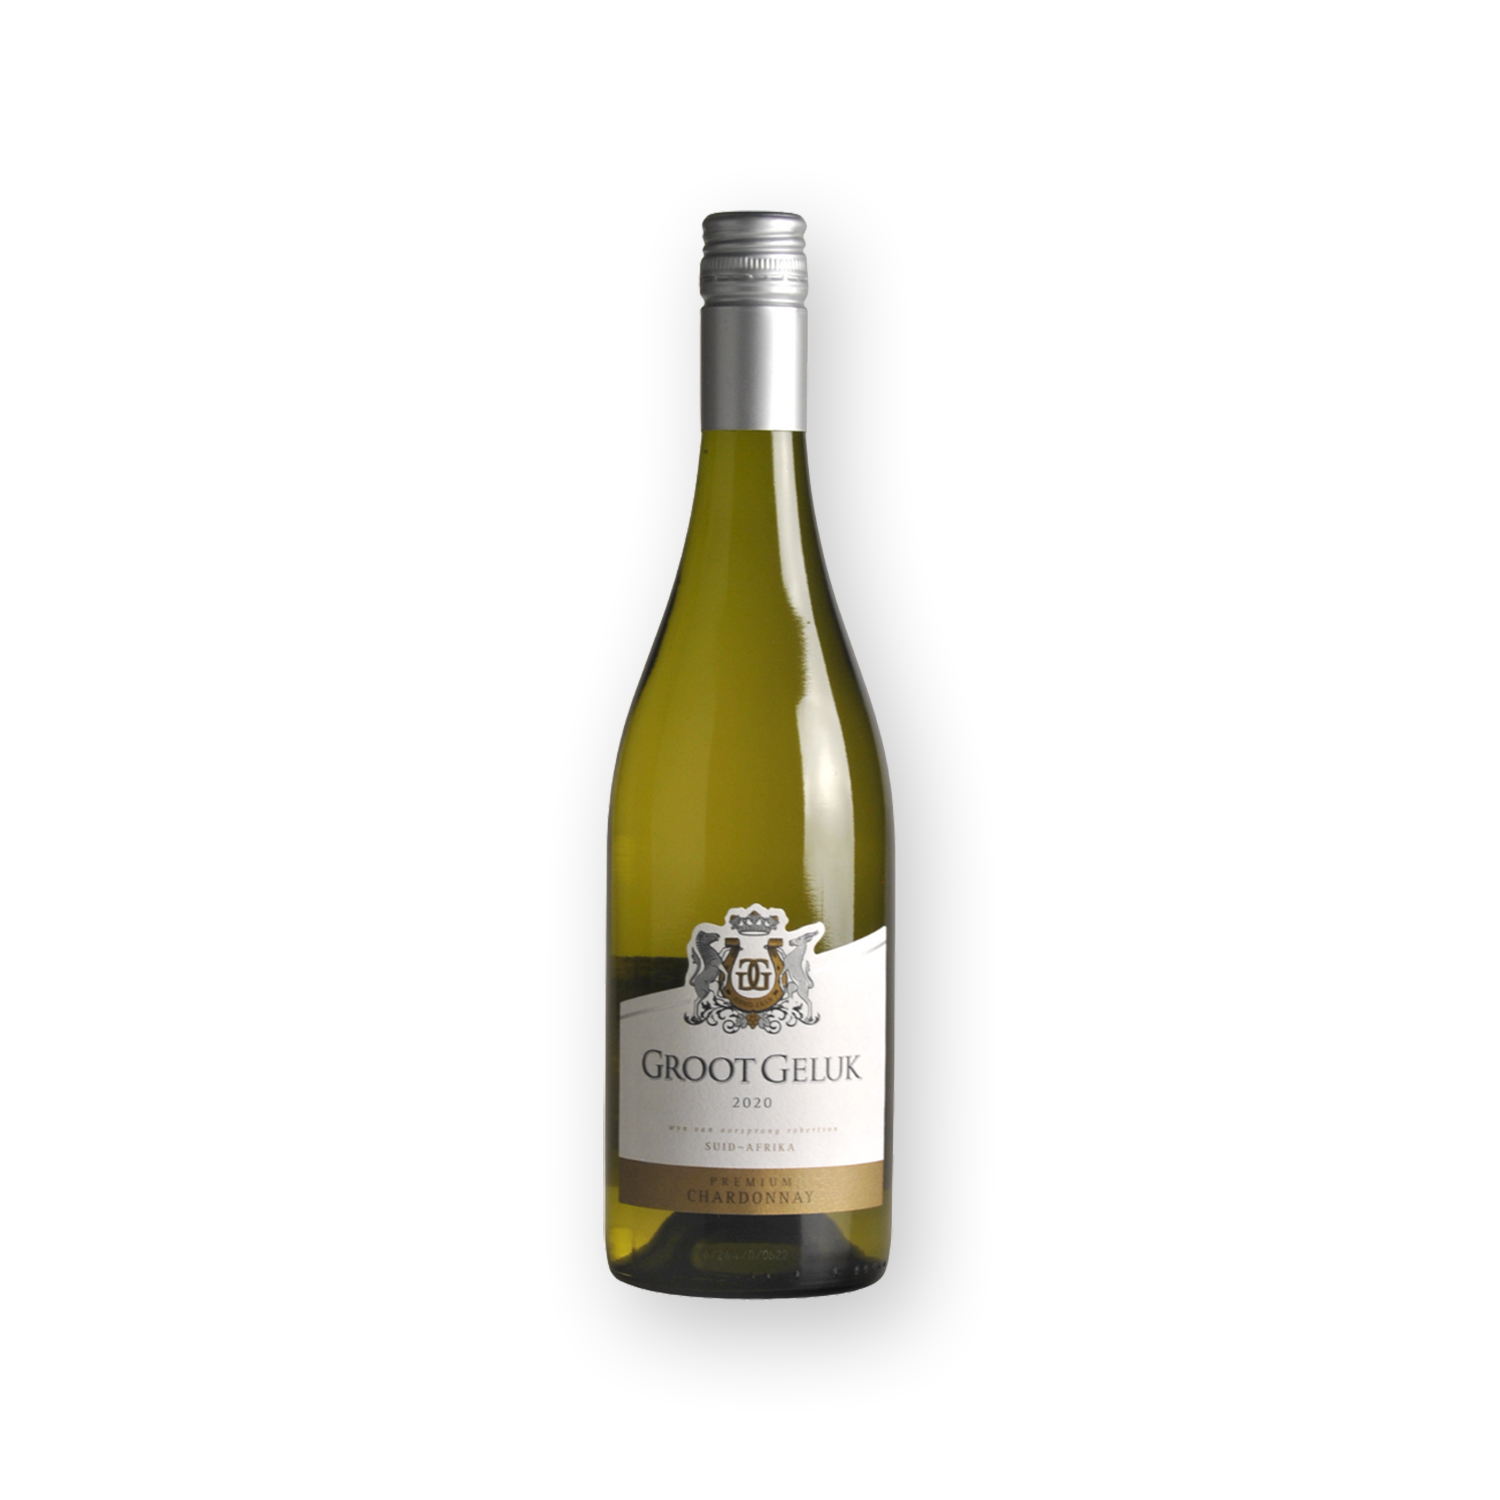 product image for Groot Geluk White wine